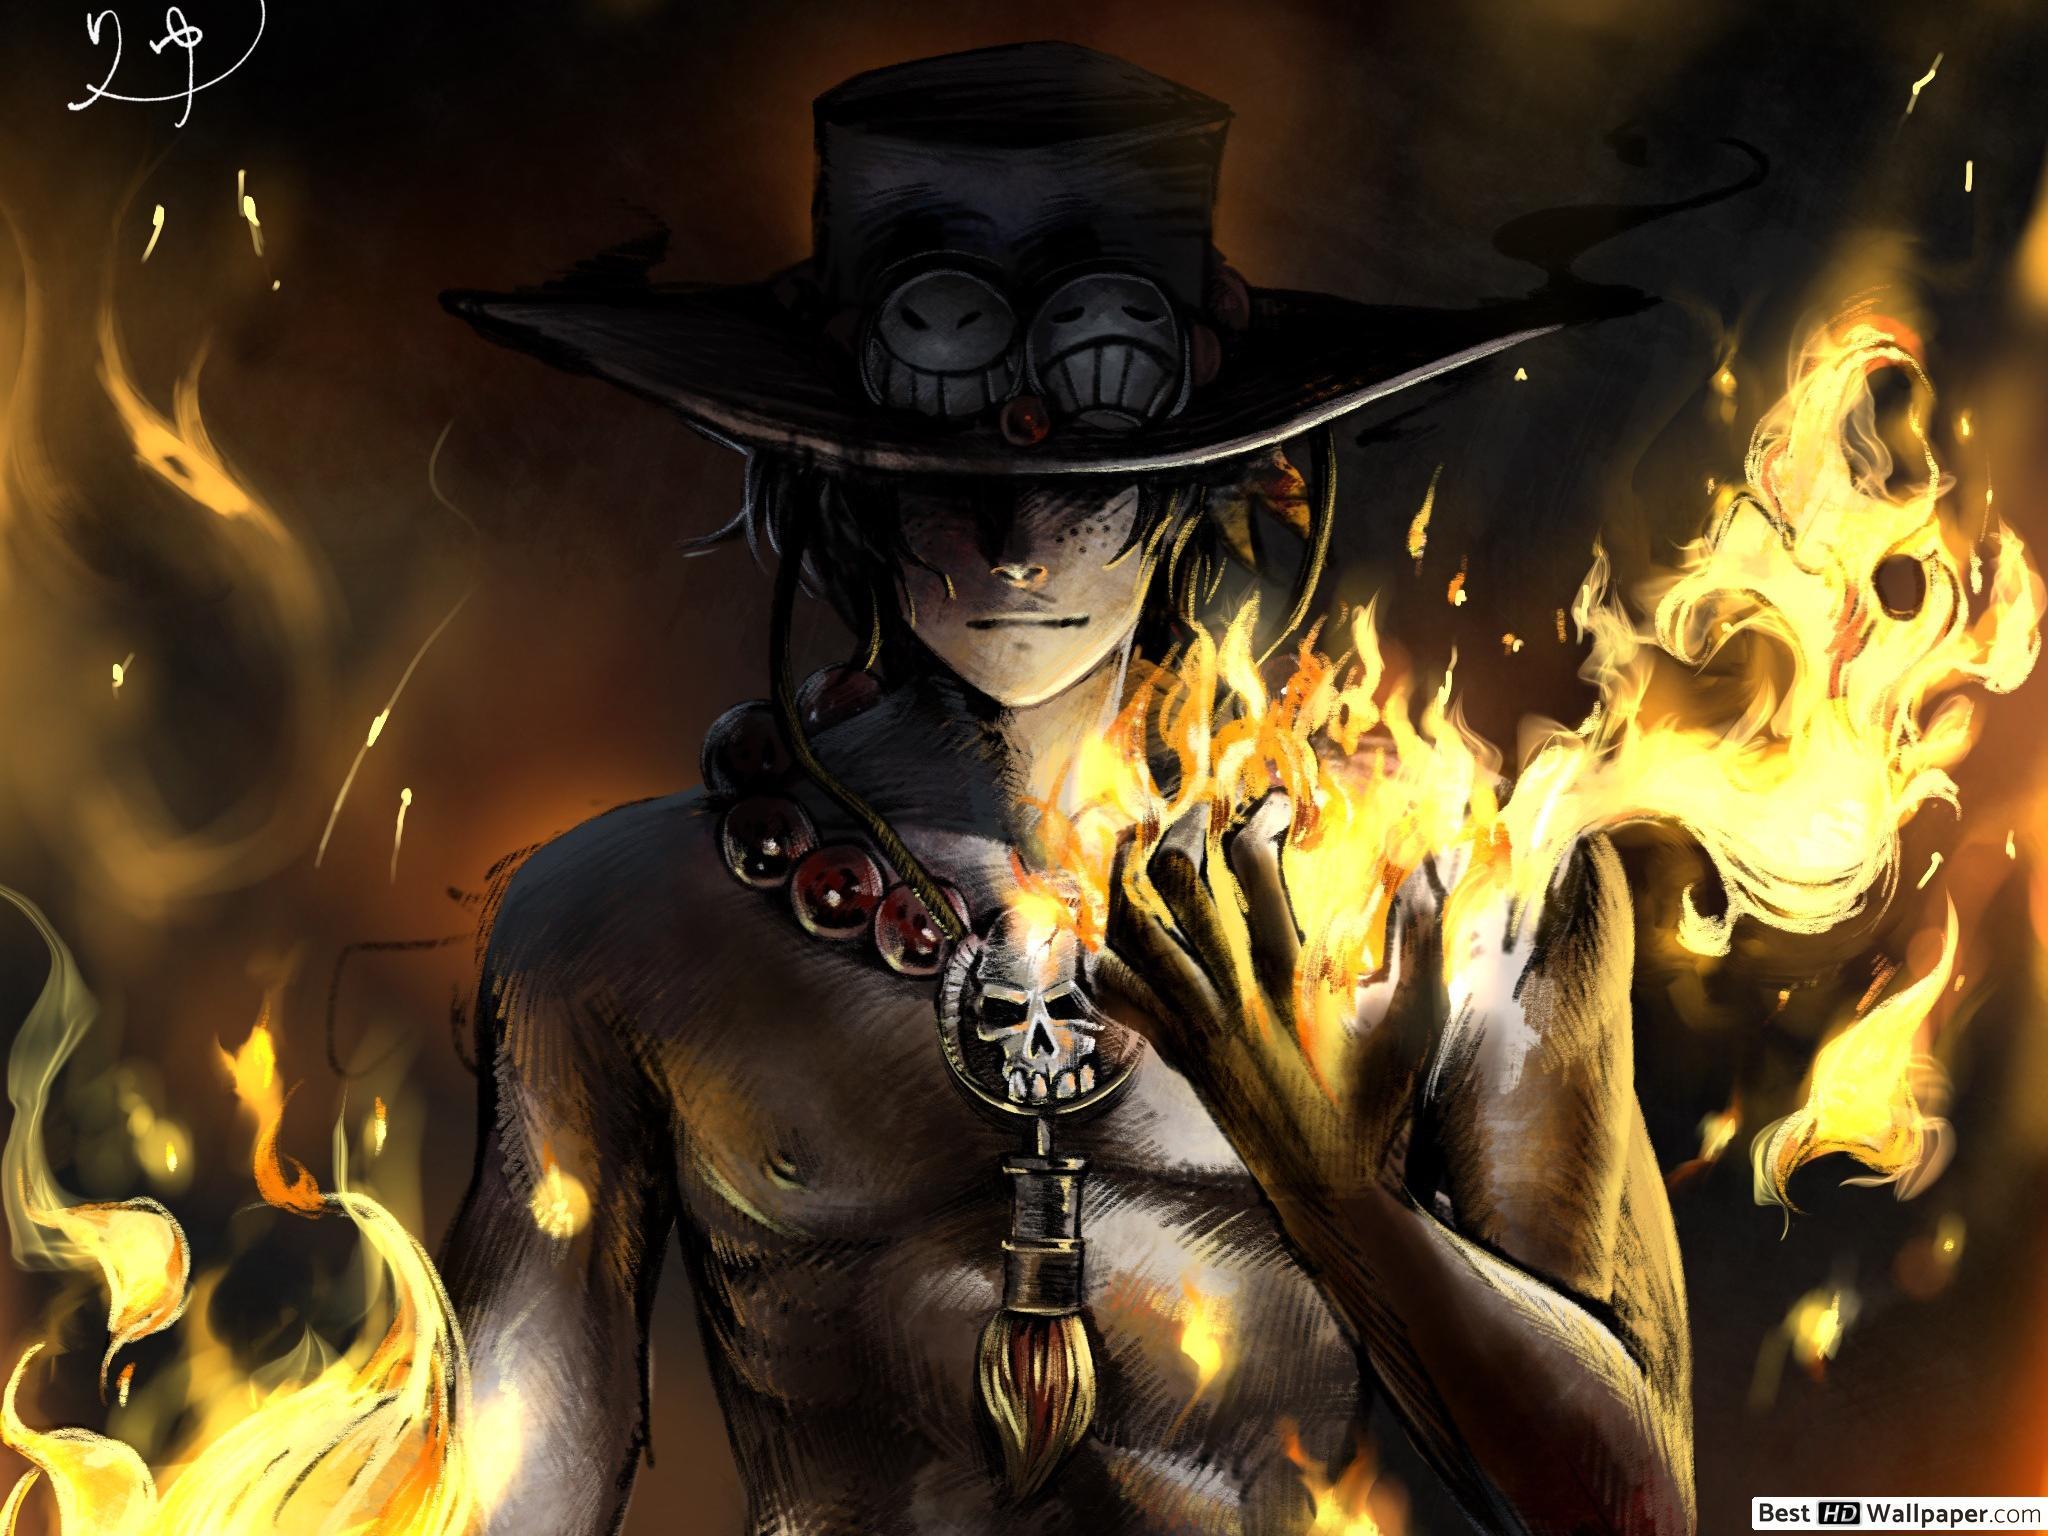 1920X1080 One Piece Ace Wallpapers - Top Free 1920X1080 One Piece Ace ...